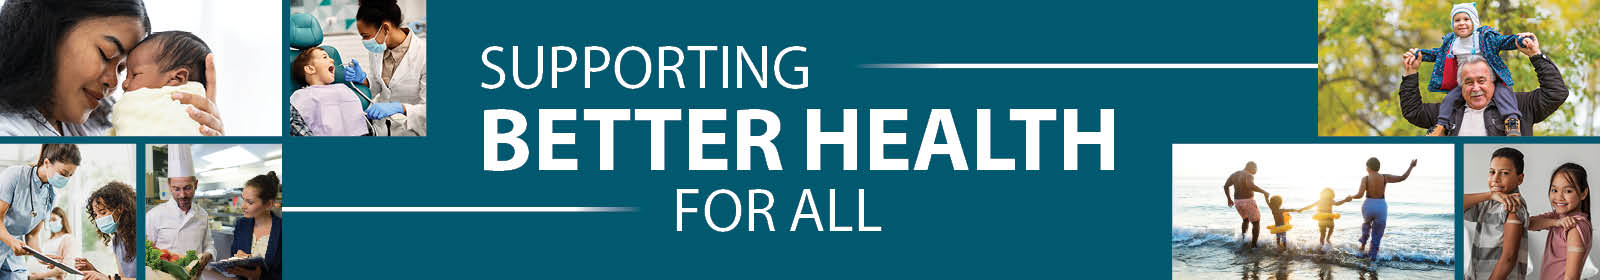 Supporting Better Health For All